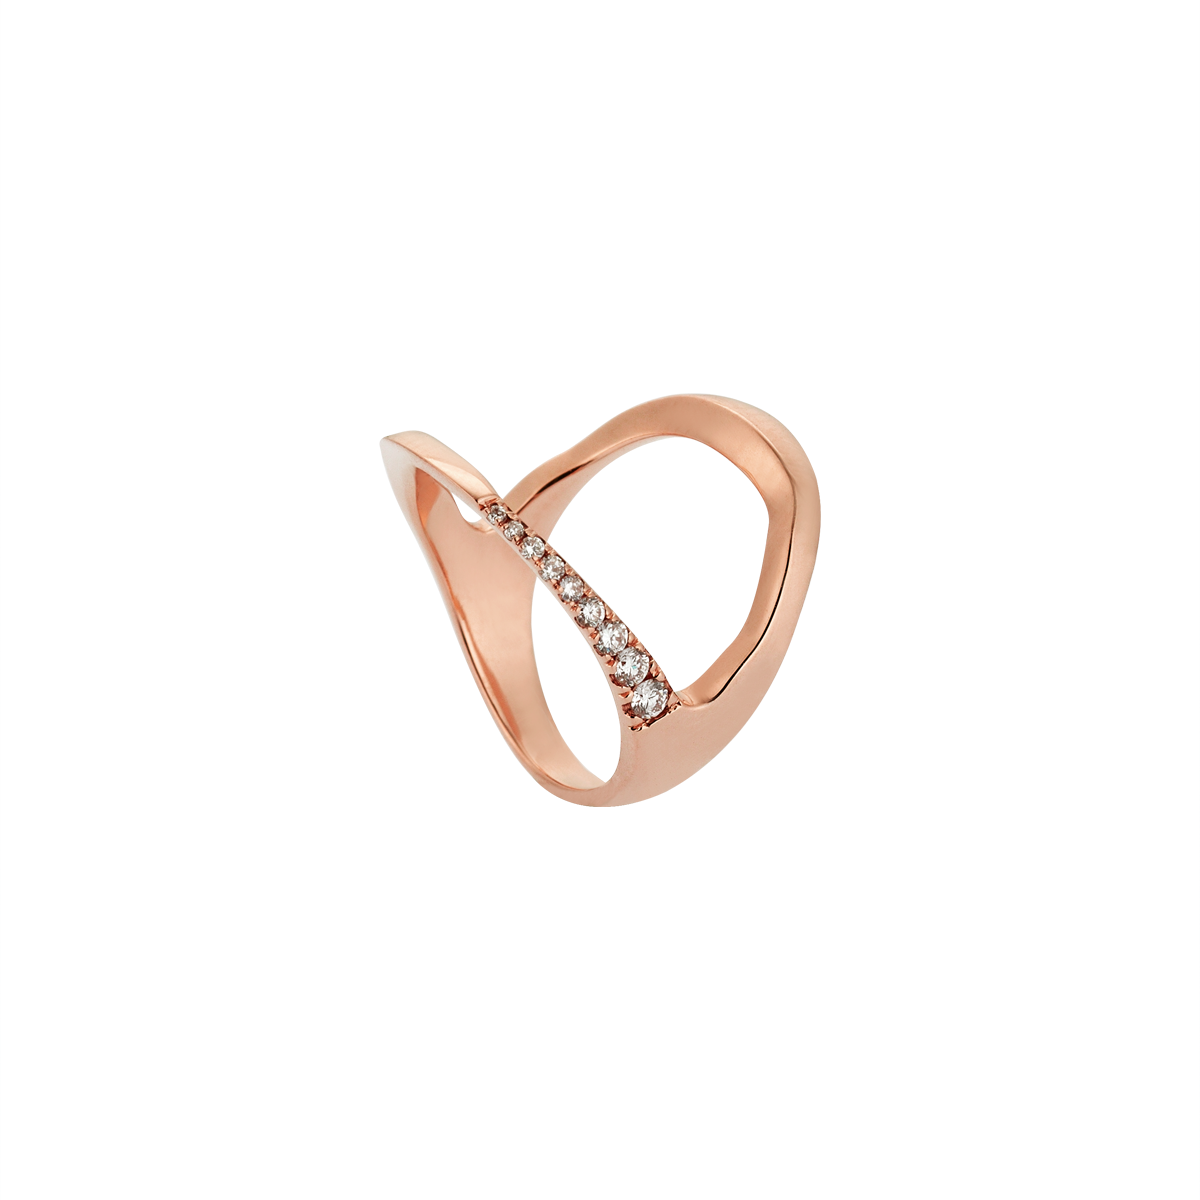 Asymmetric Side Midi Ring in Rose Gold - Her Story Shop